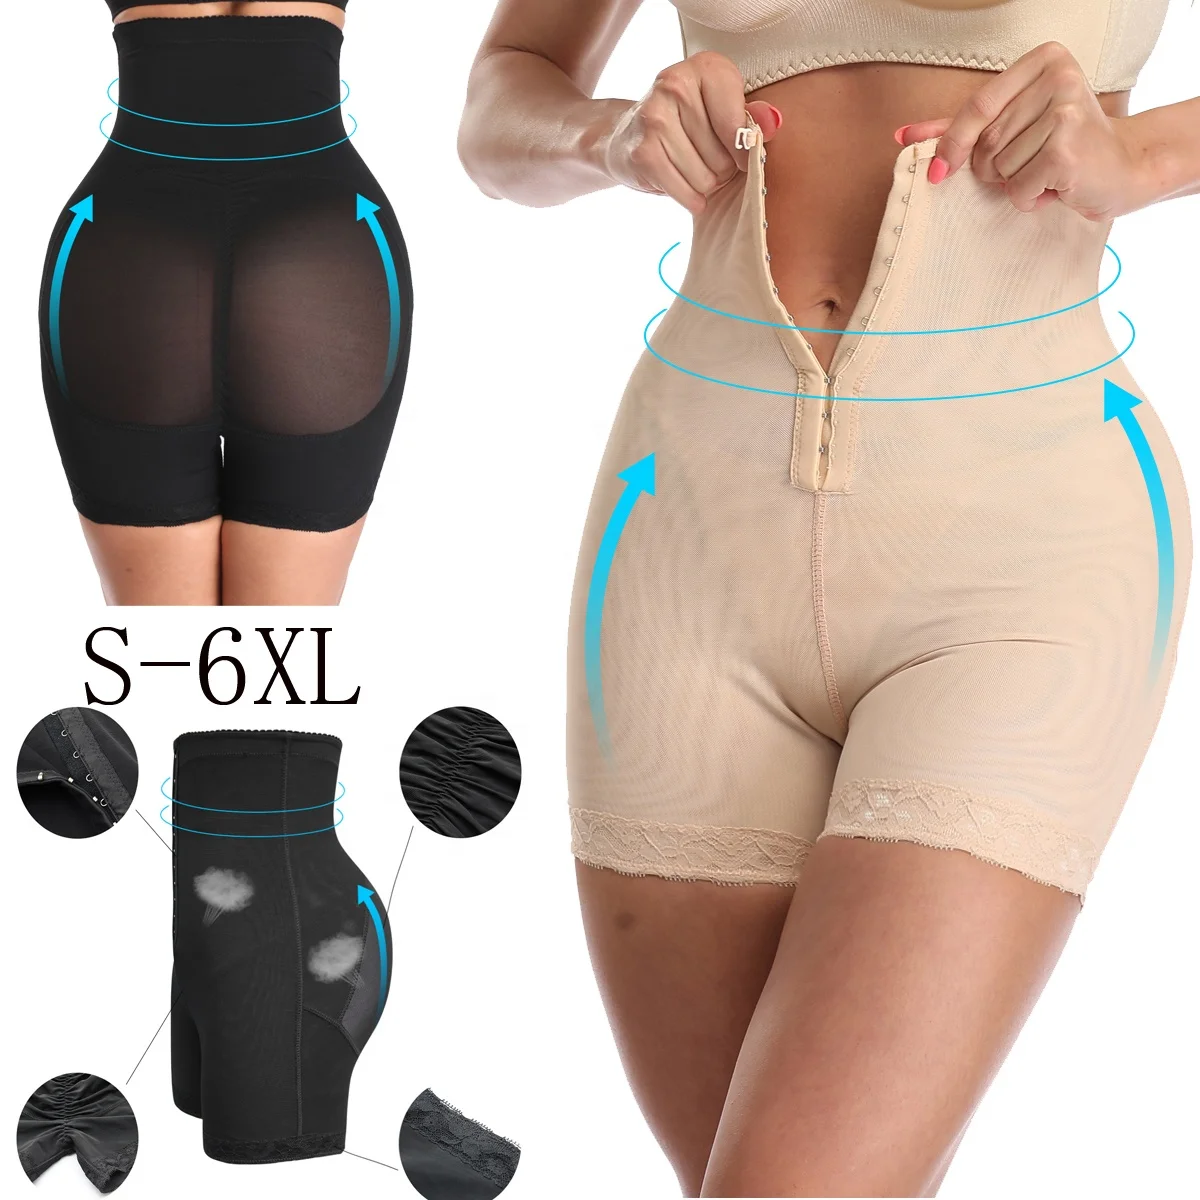 

Lynmiss Plus Size Fajas Colombianas Translucent Thigh Butt Lifter Tummy Control Slimming Waist Body Shaper for Women, Nude,black